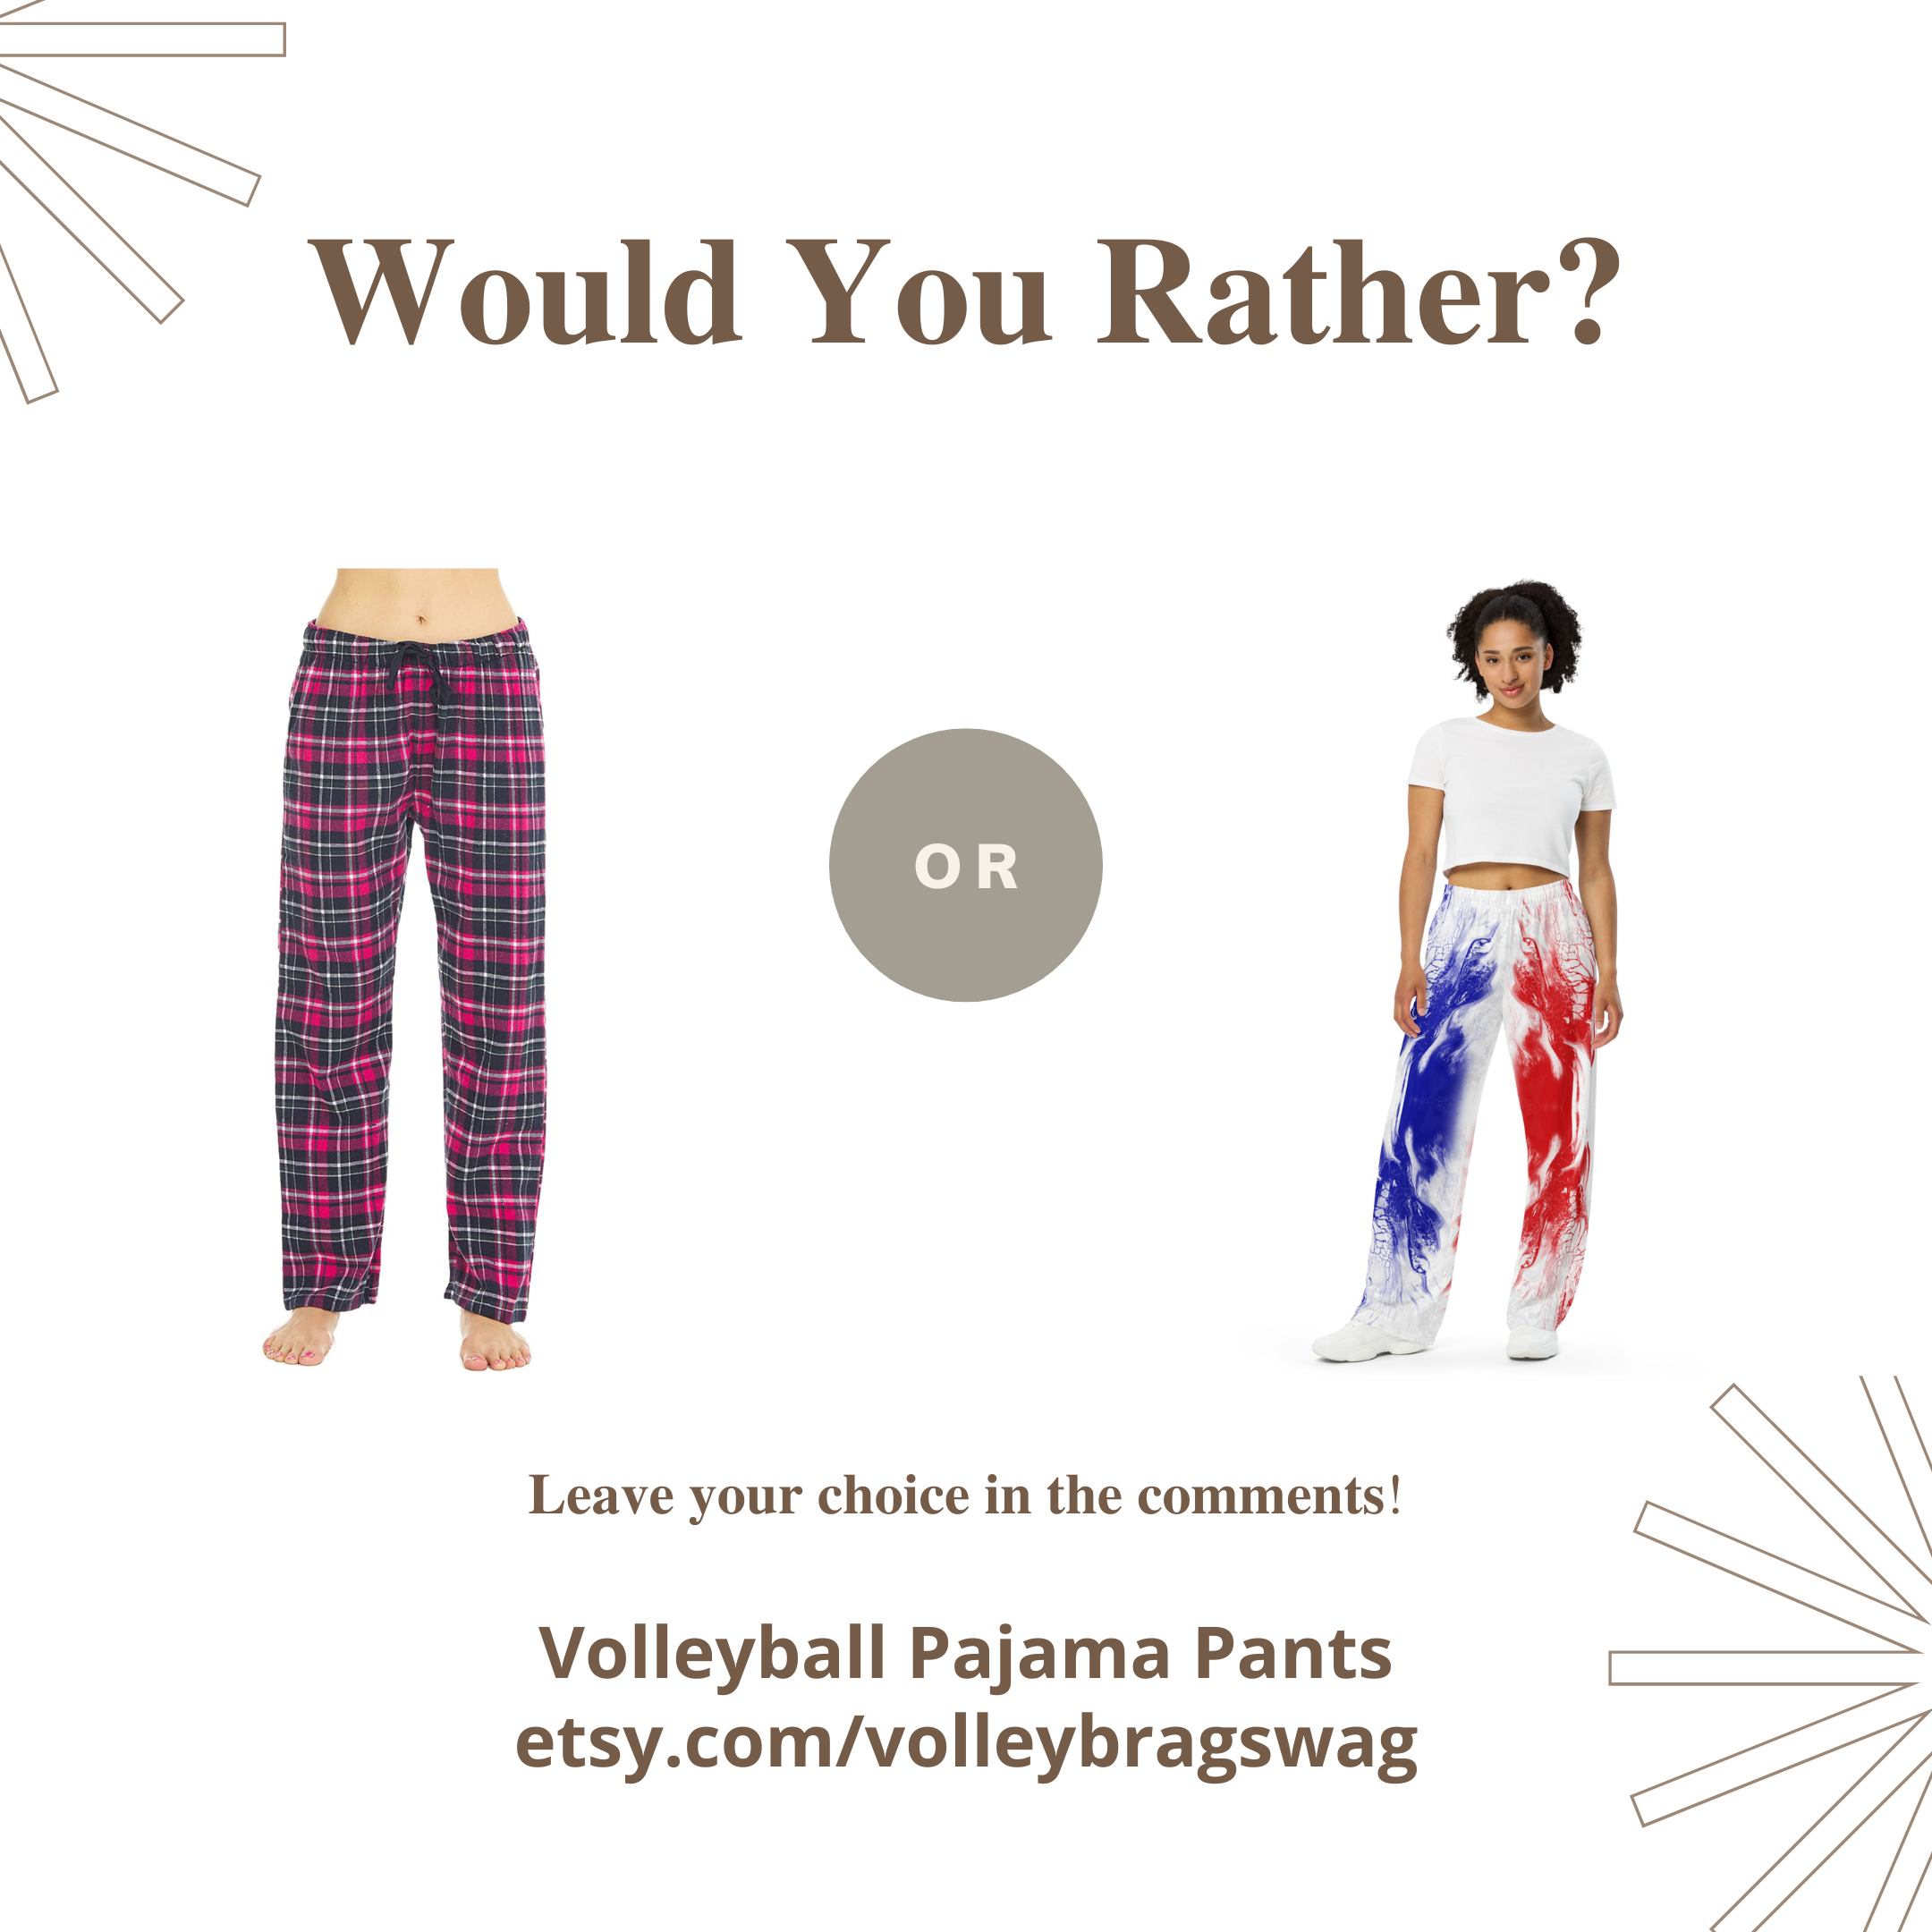 What makes these pants even more fire is that each design is inspired by the history and stories behind the flags of different countries. Not only are these pants flirtatiously festive and fashionable, but they also have a meaningful backstory.